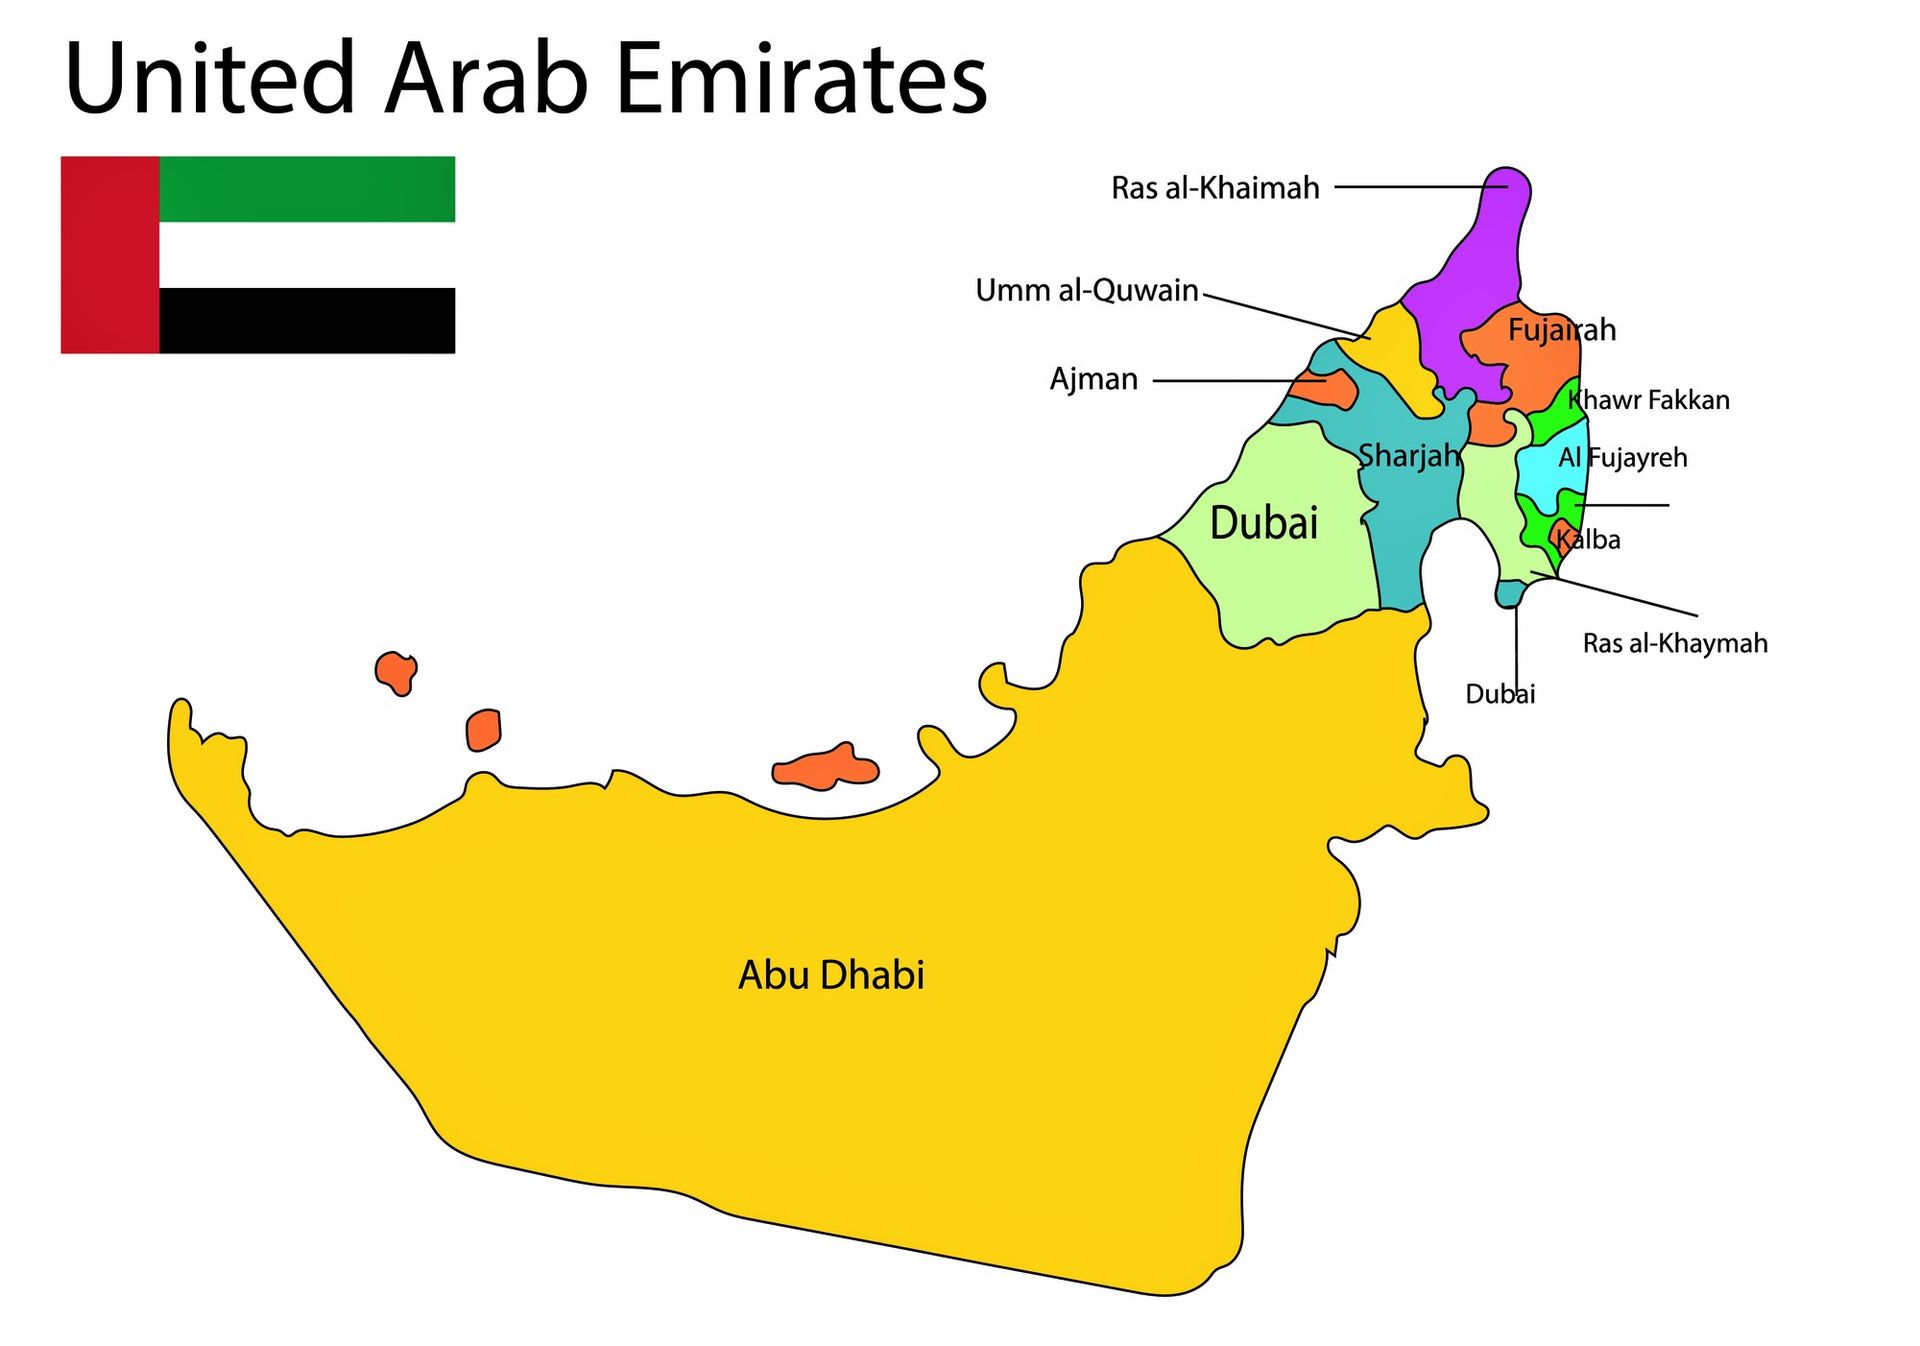 the map of the United Arab Emirates